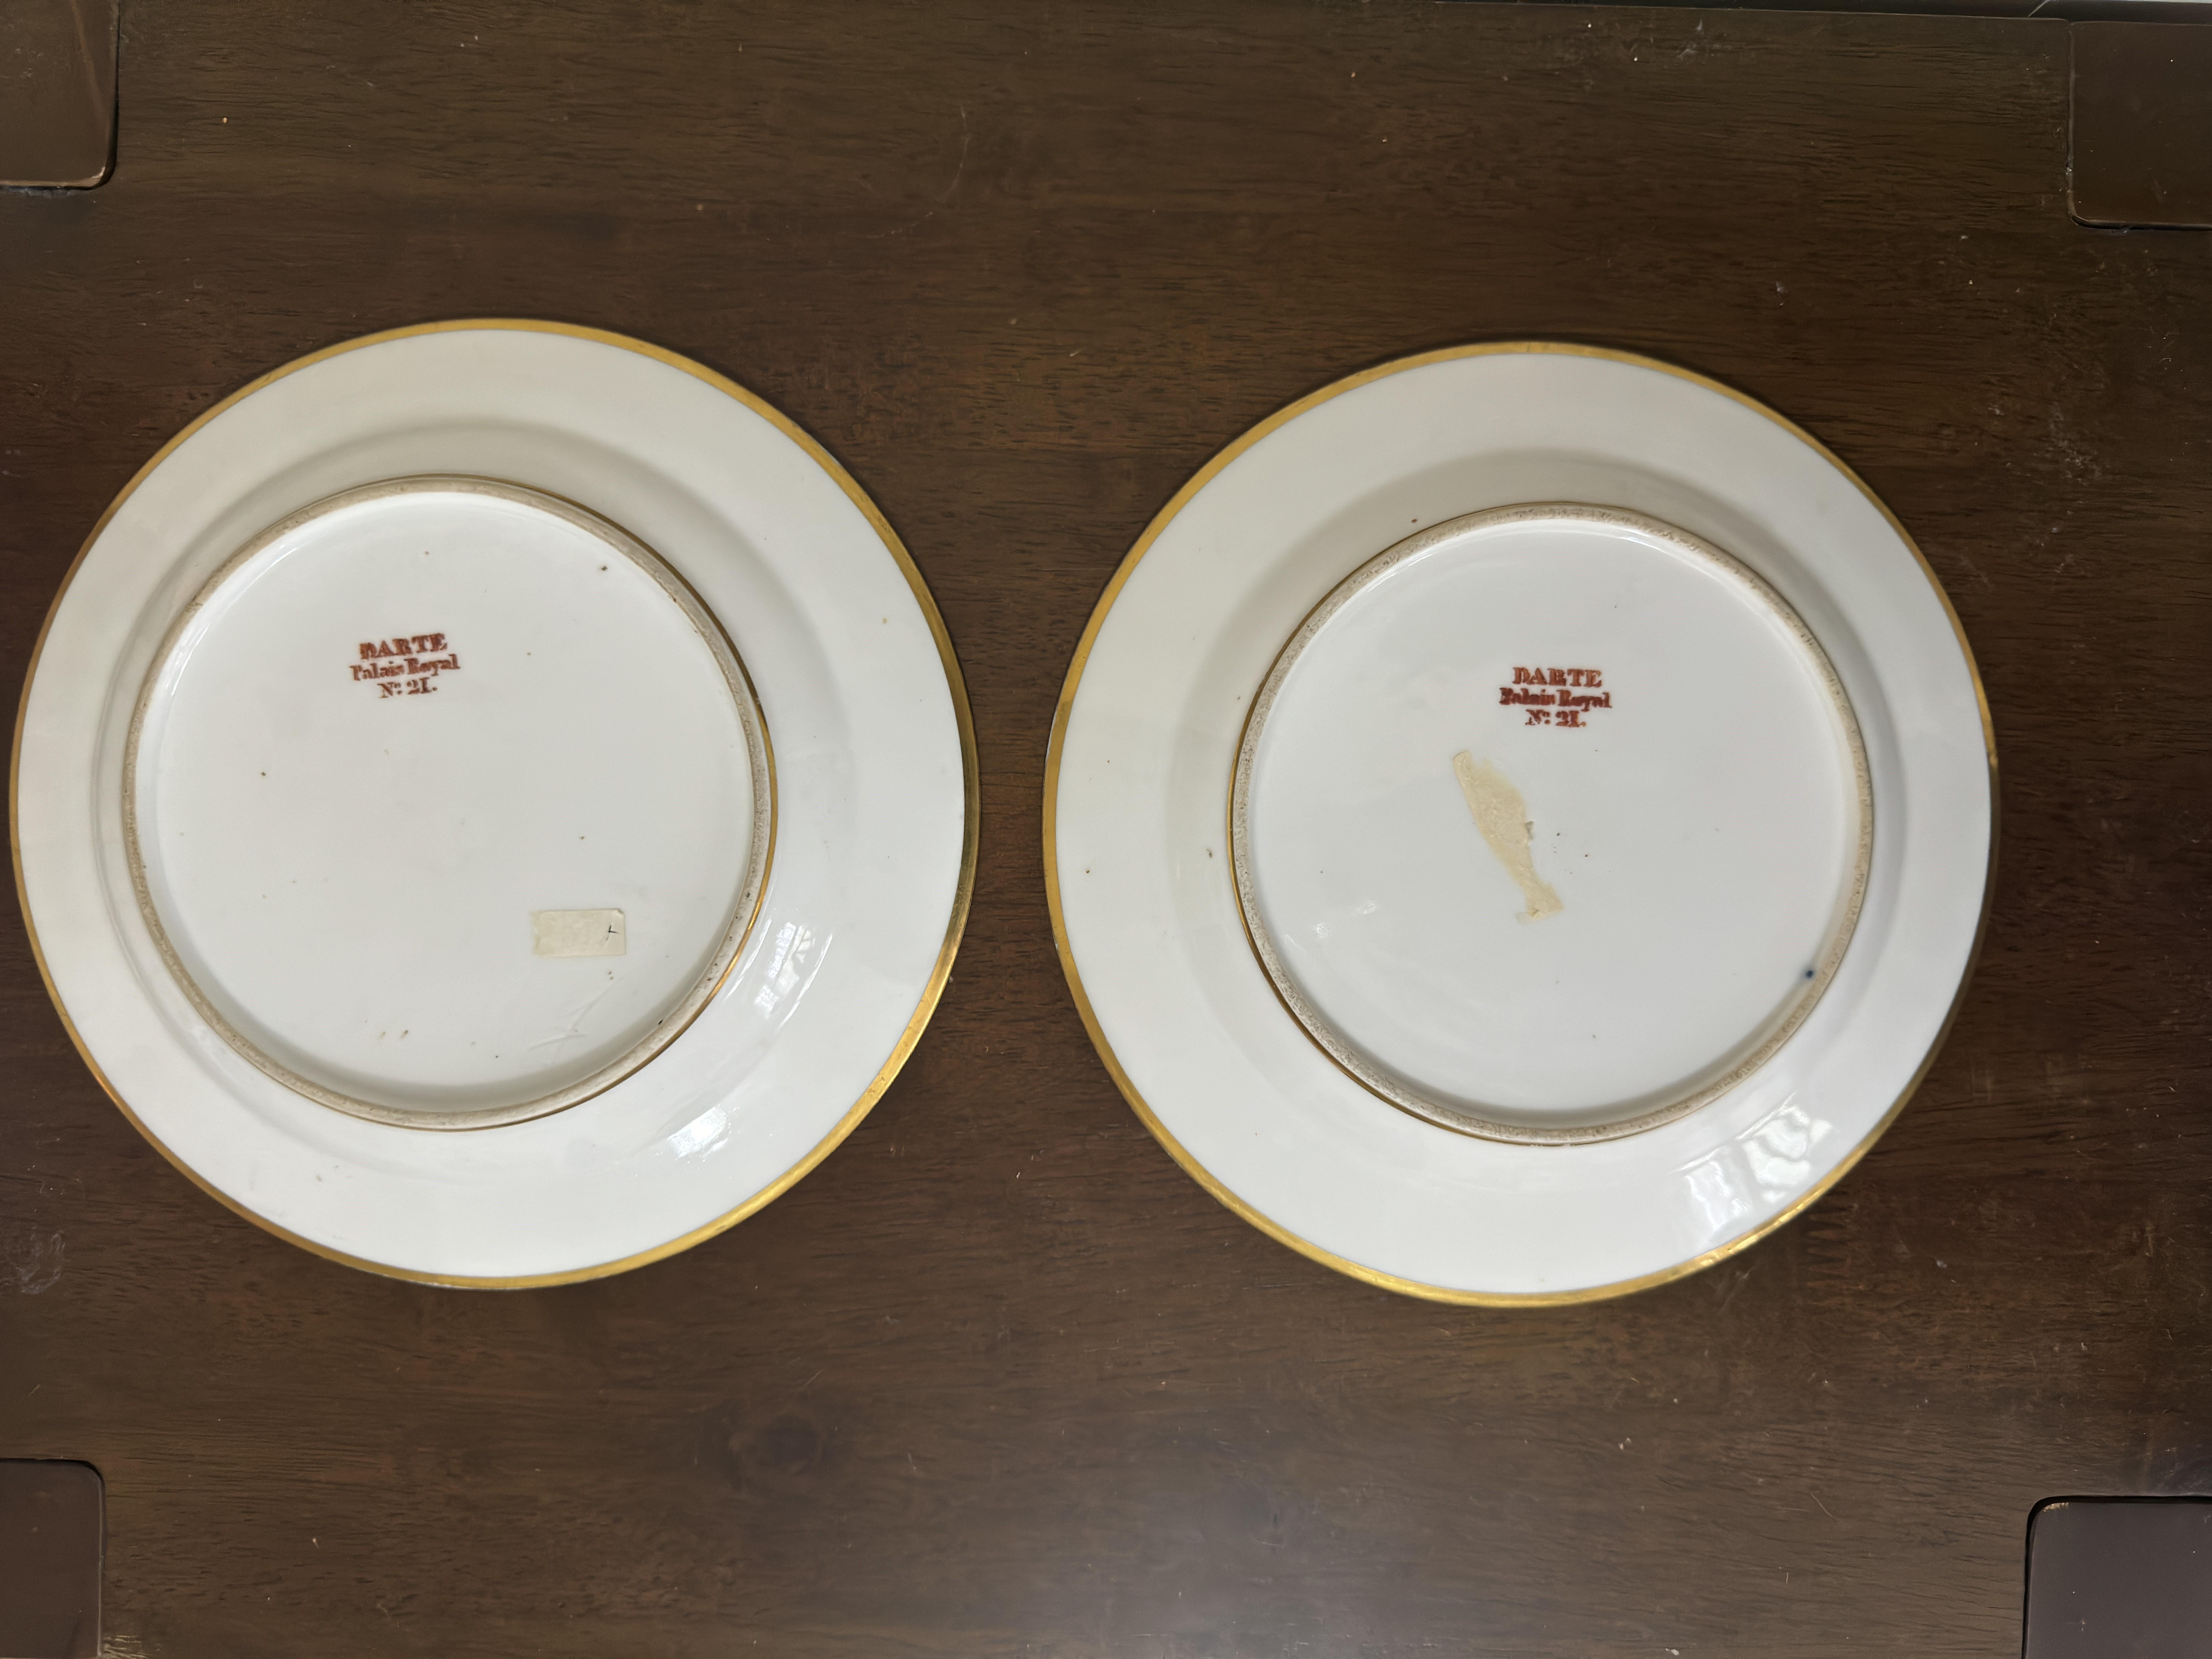 Pair of antique Darte Brothers cobalt blue porcelain plates magnificently painted with the French countryside, featuring cows, goats and sheep, decorated with gold rims. Each with the original Darte Brothers Palais Royal signature mark in red ink.